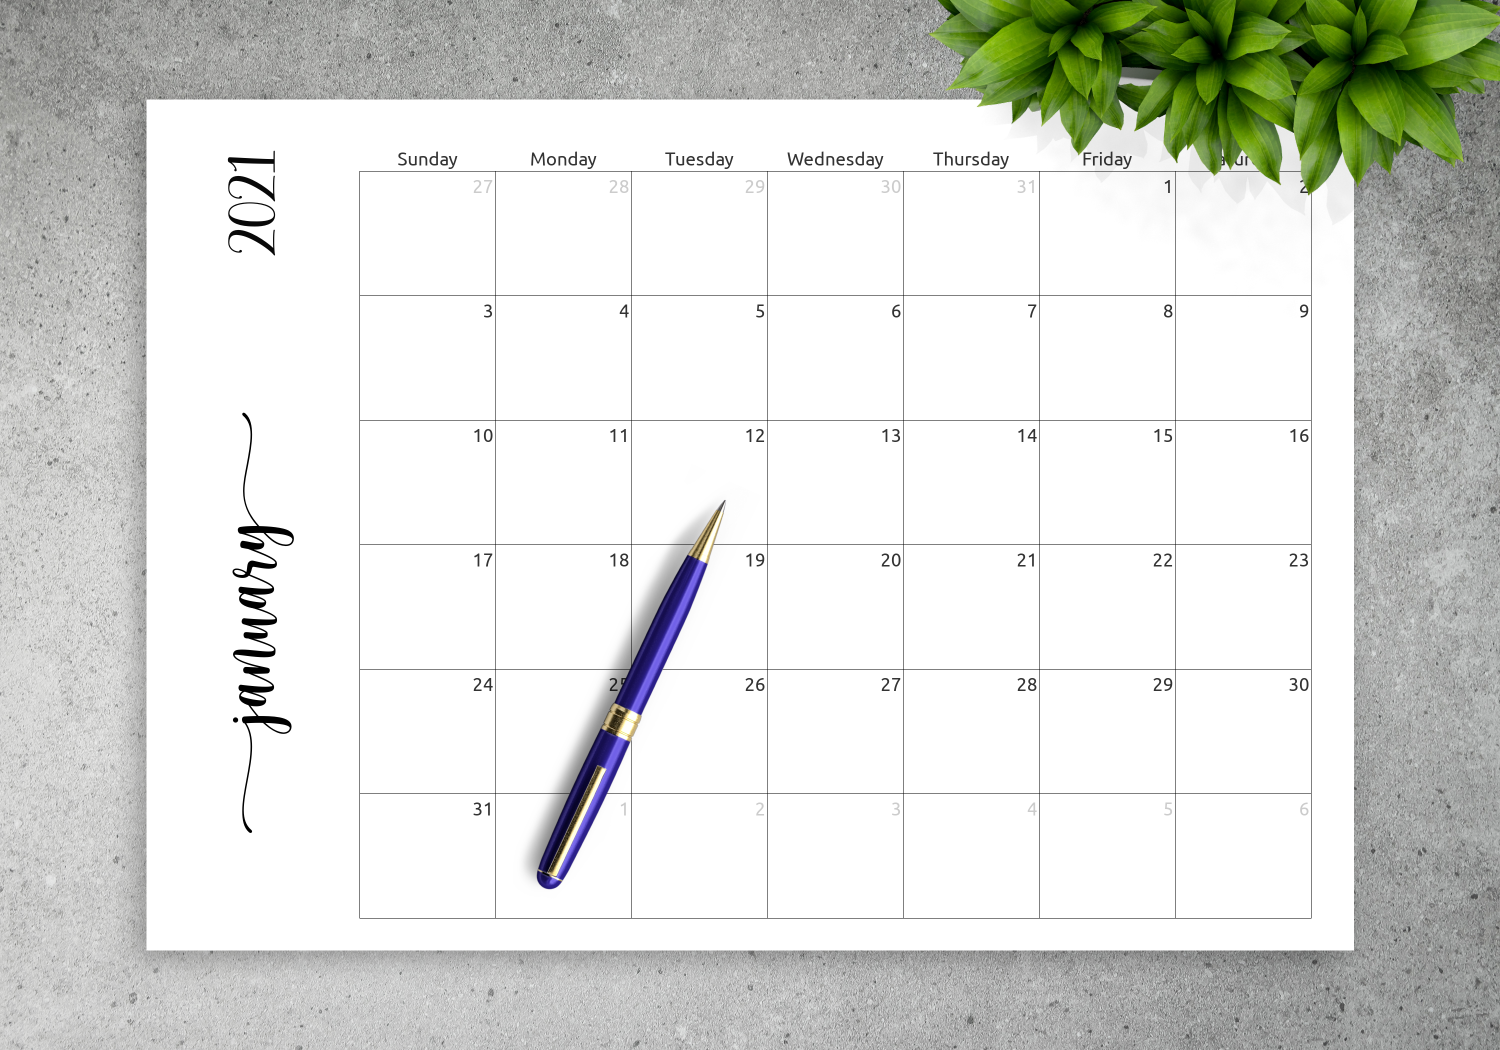 free-schedule-templates-customize-download-d0e